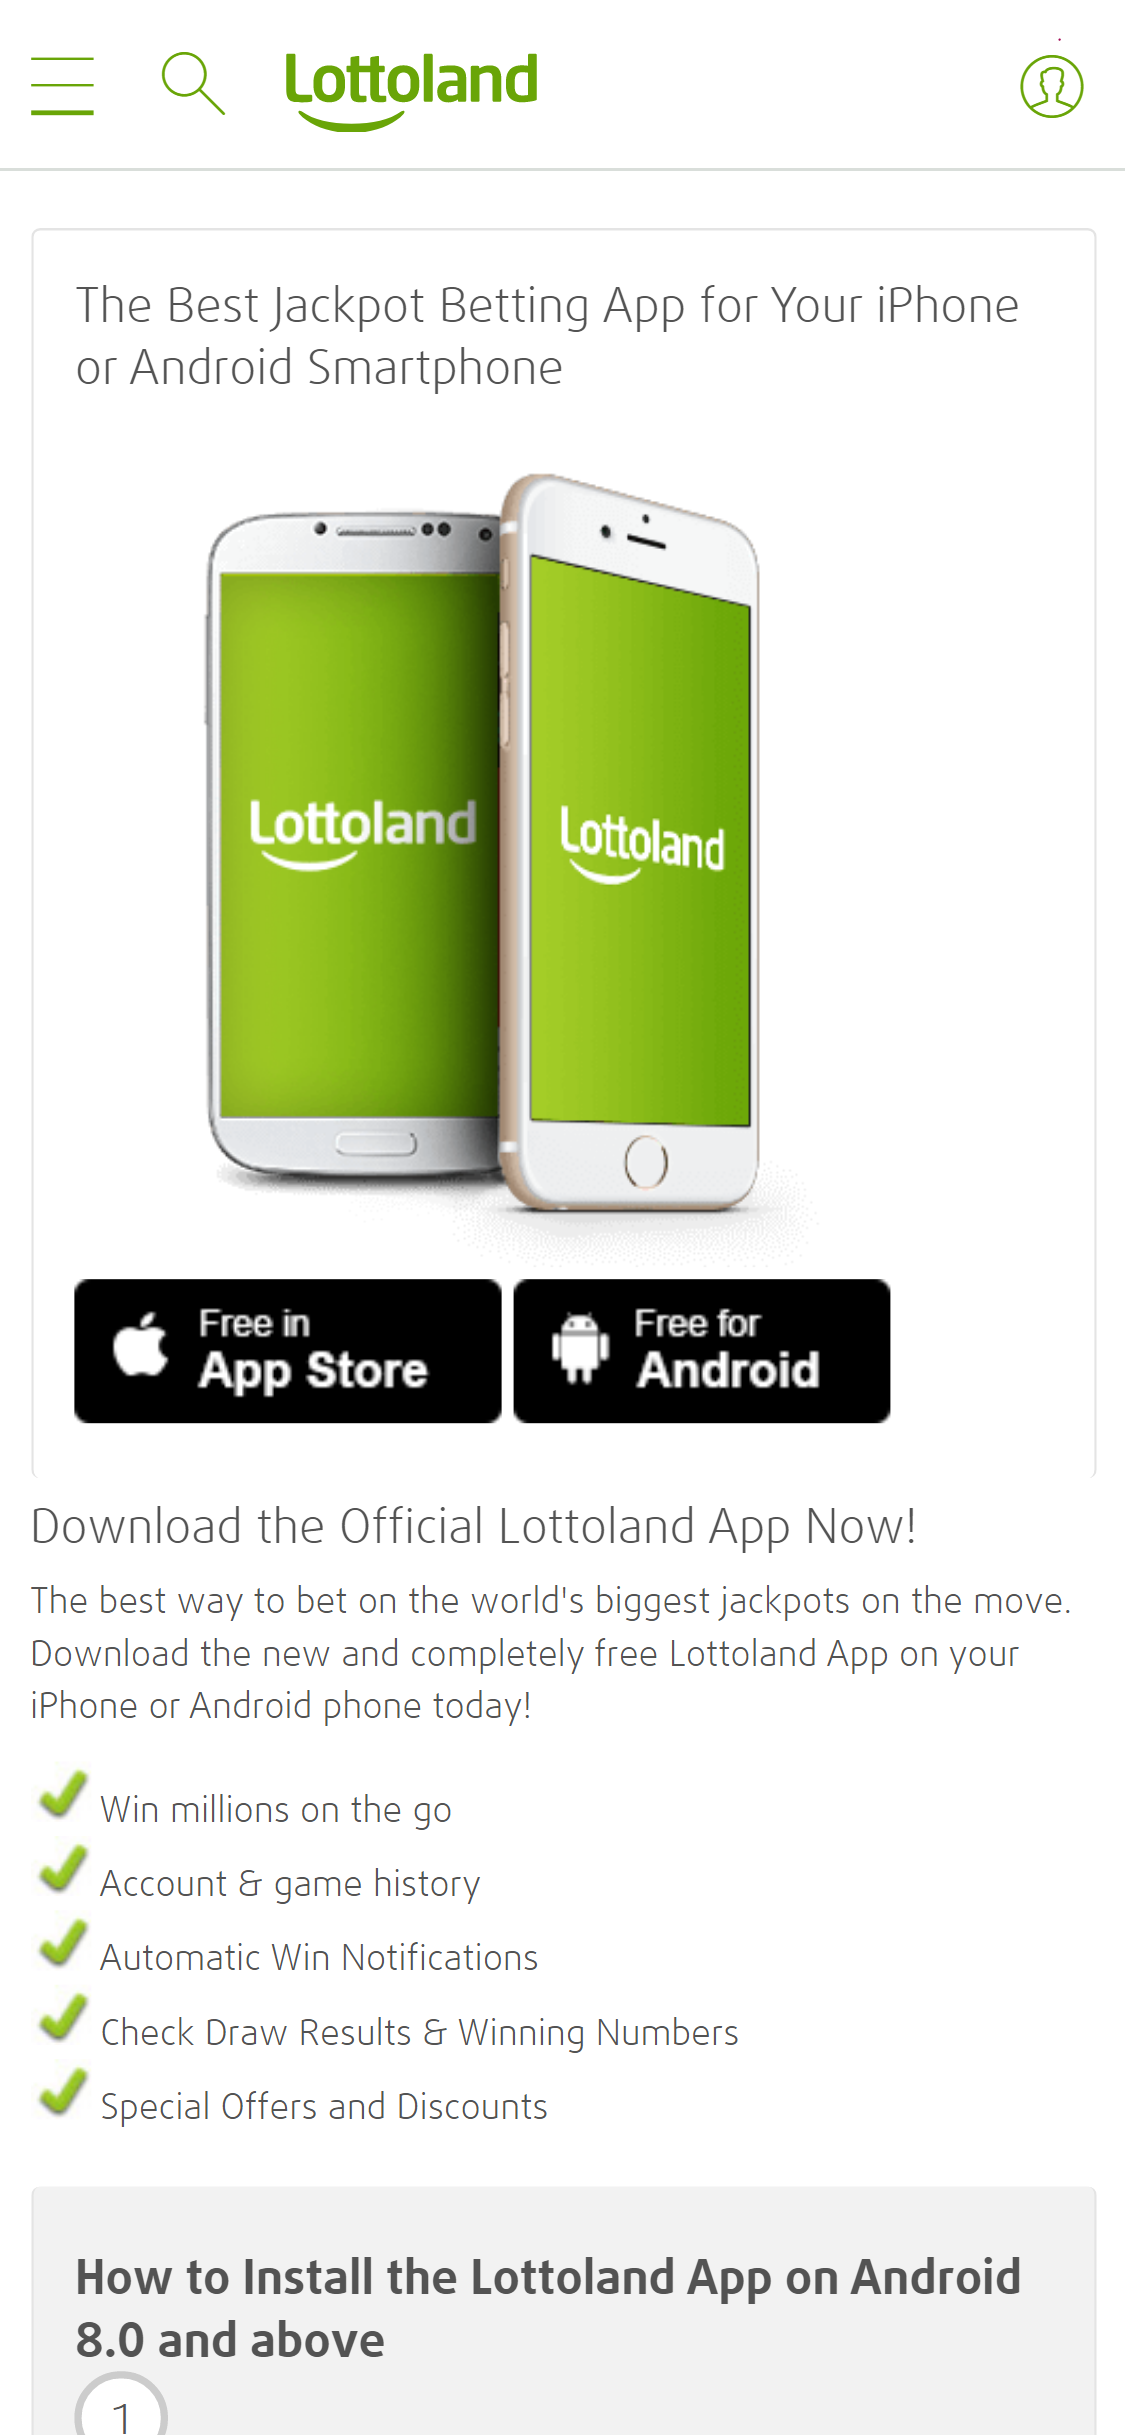 Lottoland Mobile App Review